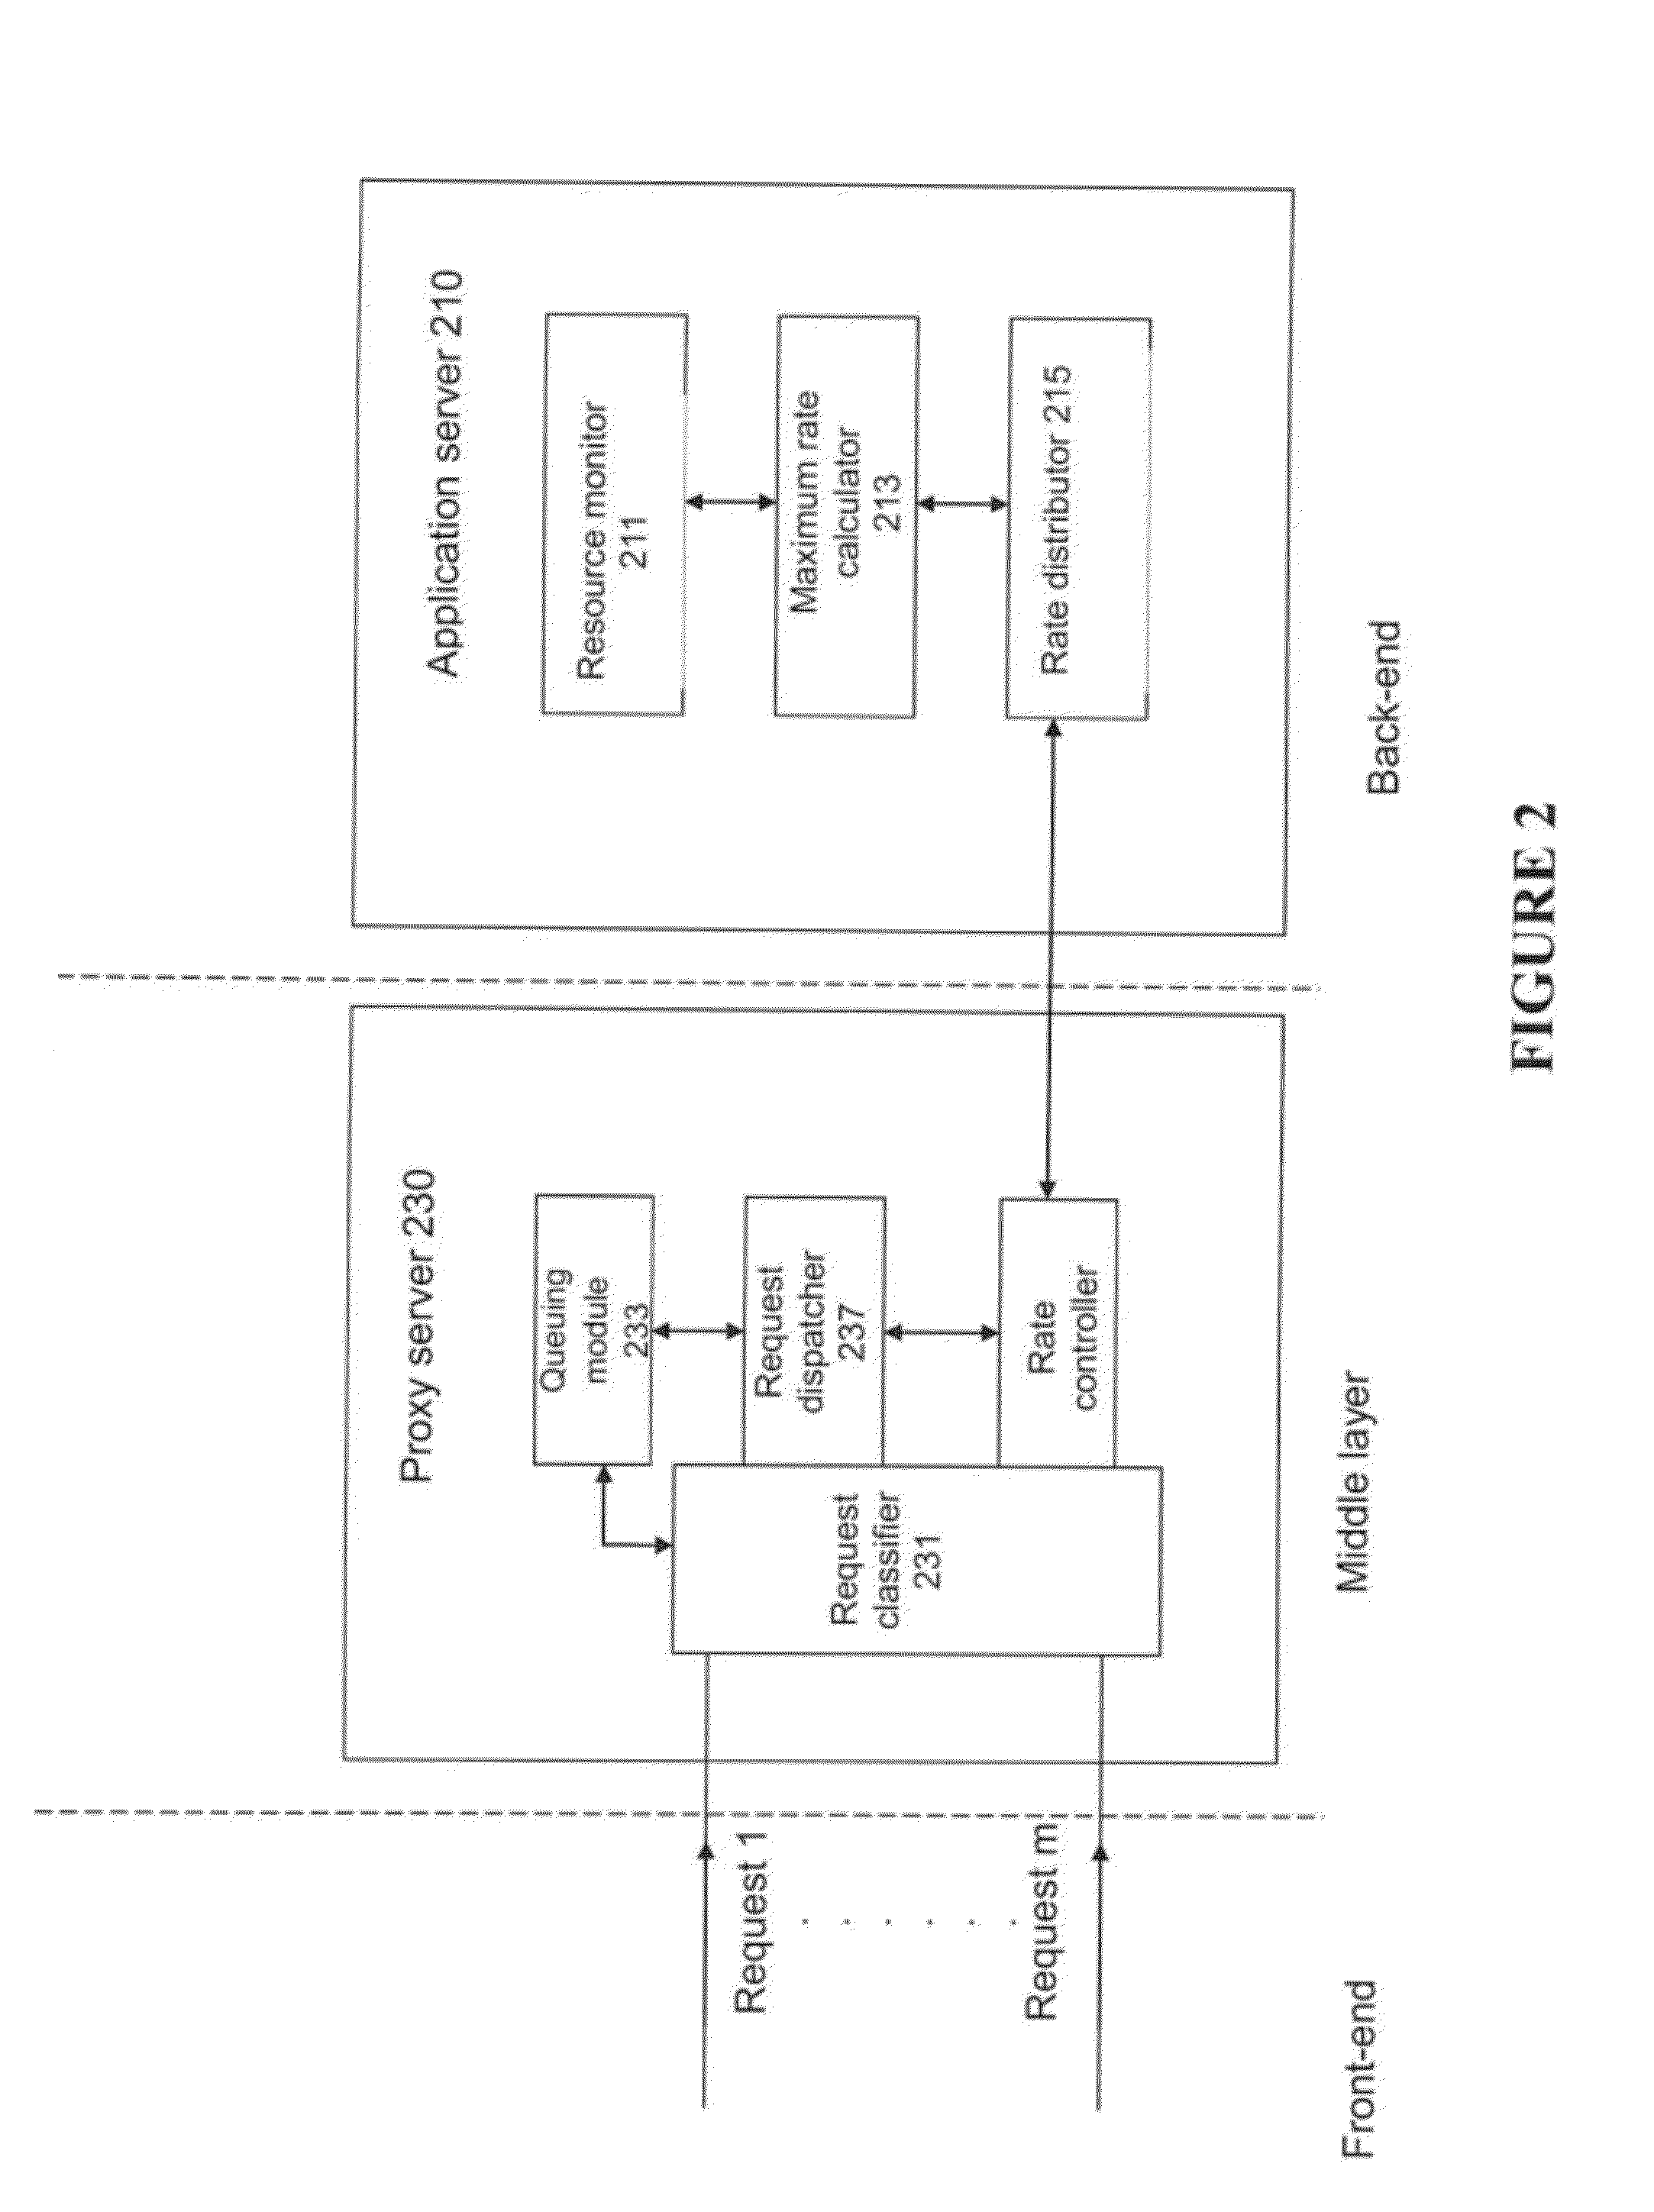 Proxy server, hierarchical network system, and distributed workload management method